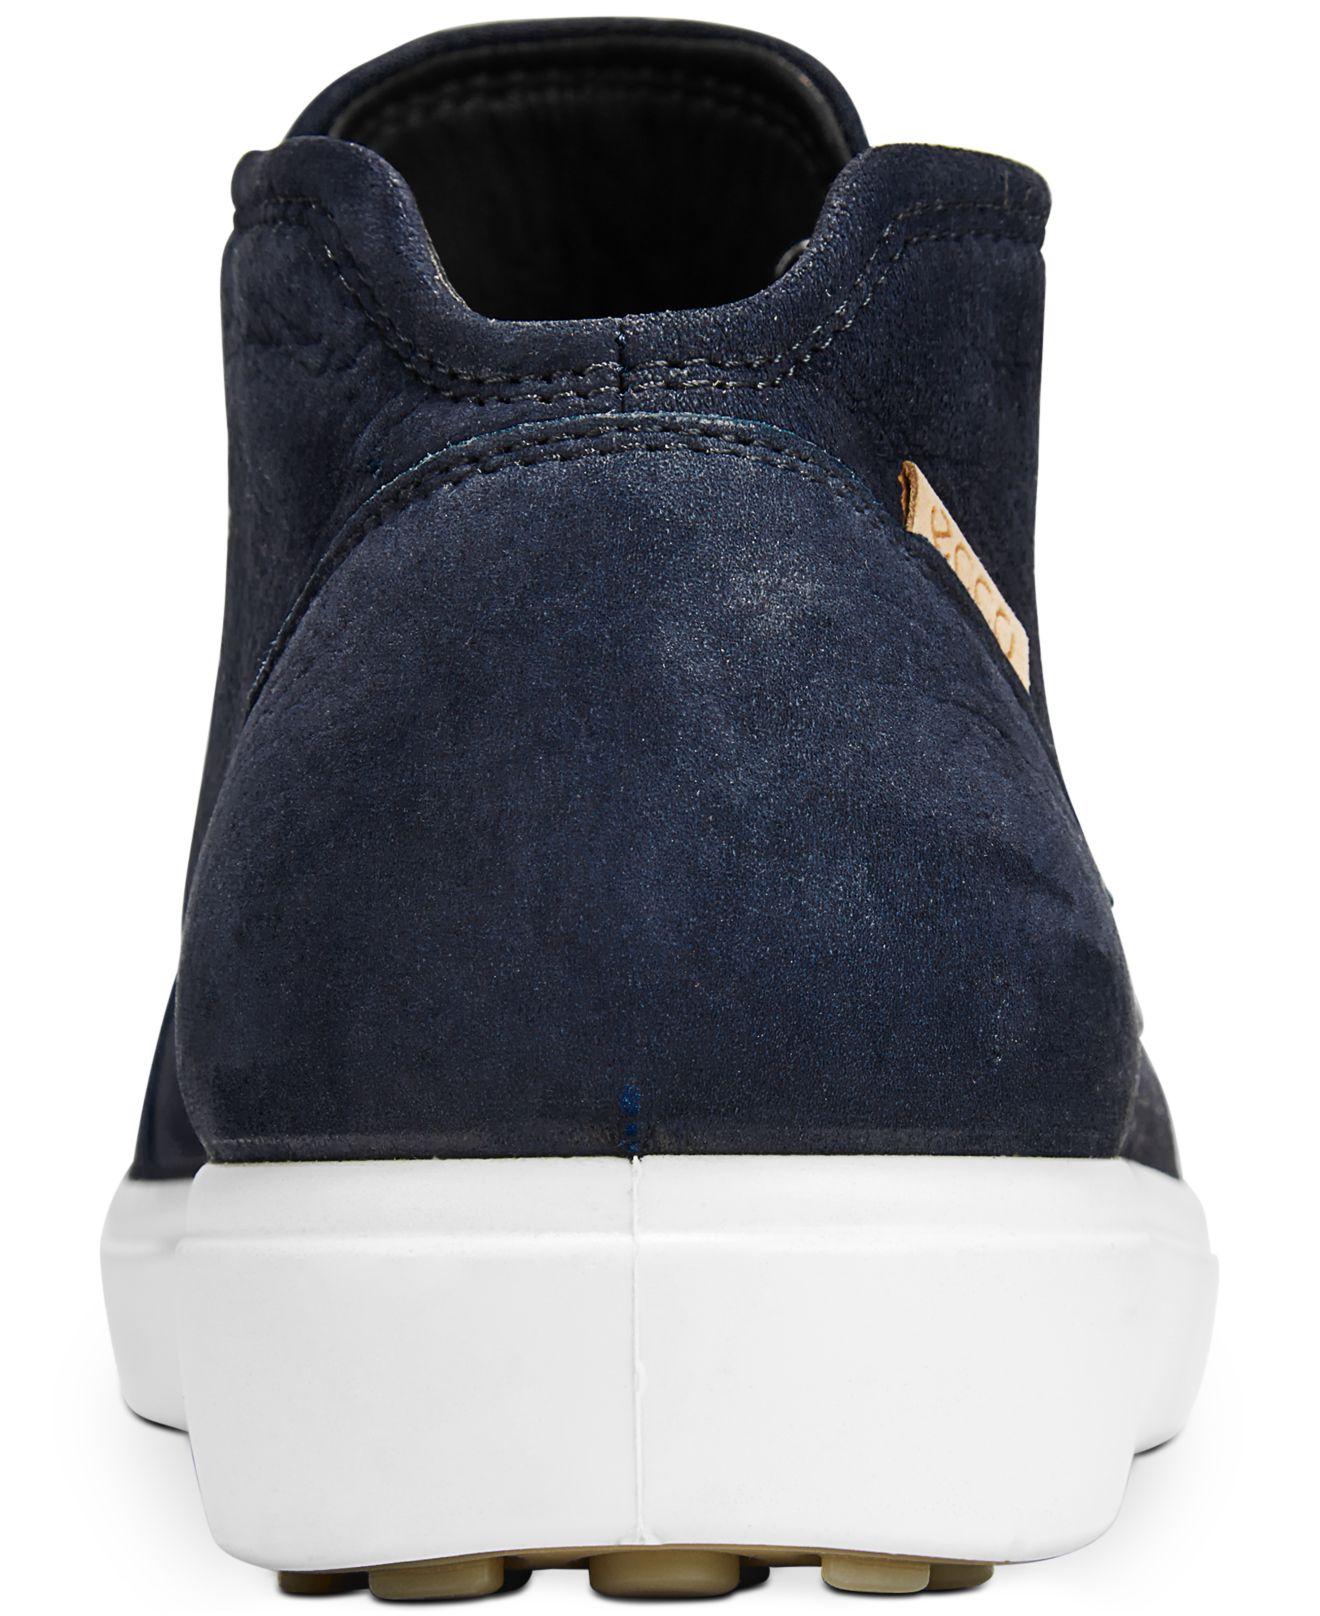 Ecco Leather Soft 7 Low Booties in Night Sky Navy (Blue) - Lyst